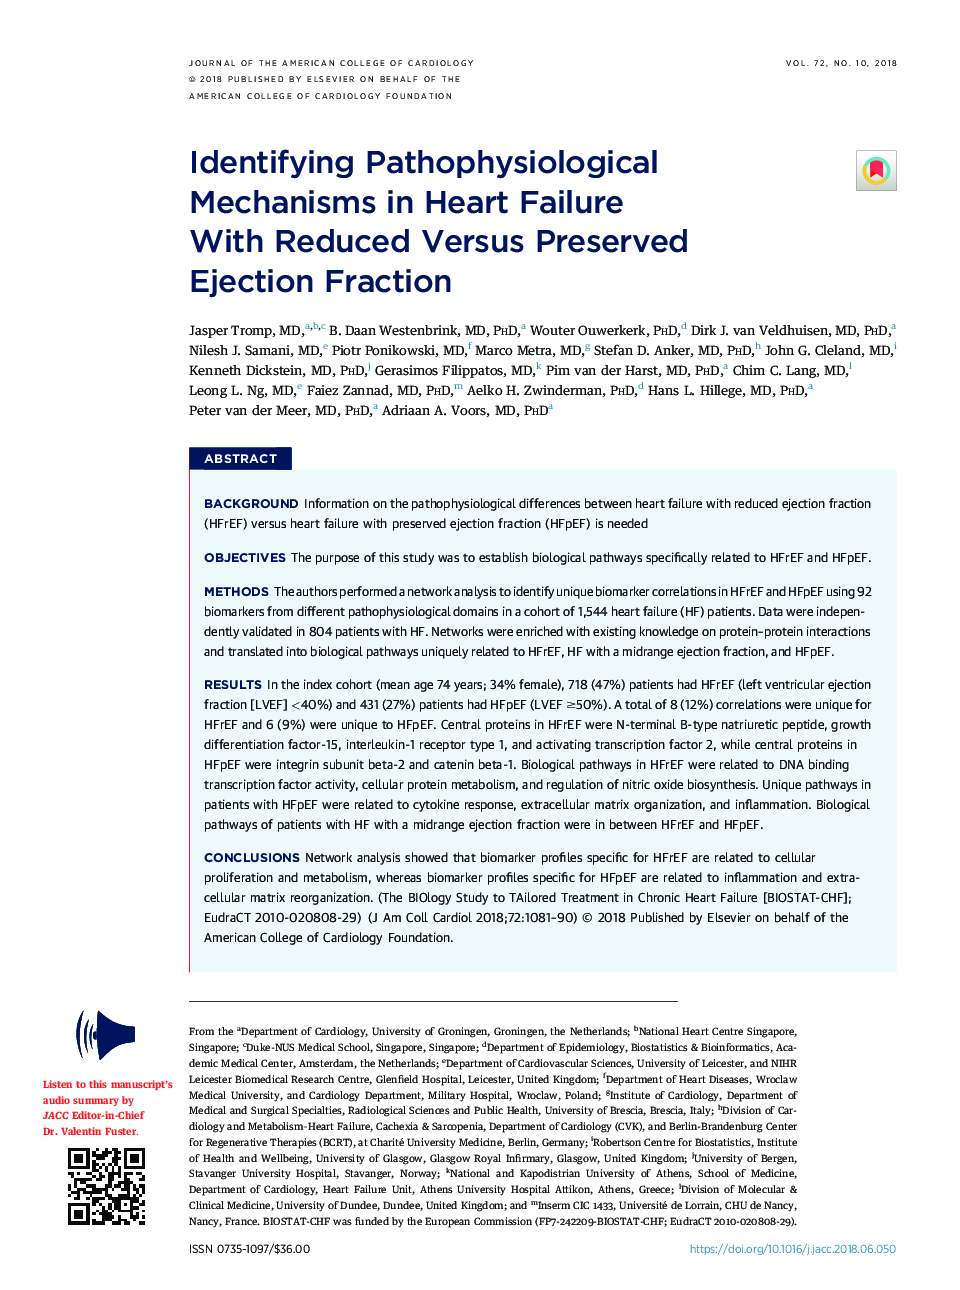 Identifying Pathophysiological Mechanisms in Heart Failure WithÂ Reduced Versus Preserved EjectionÂ Fraction